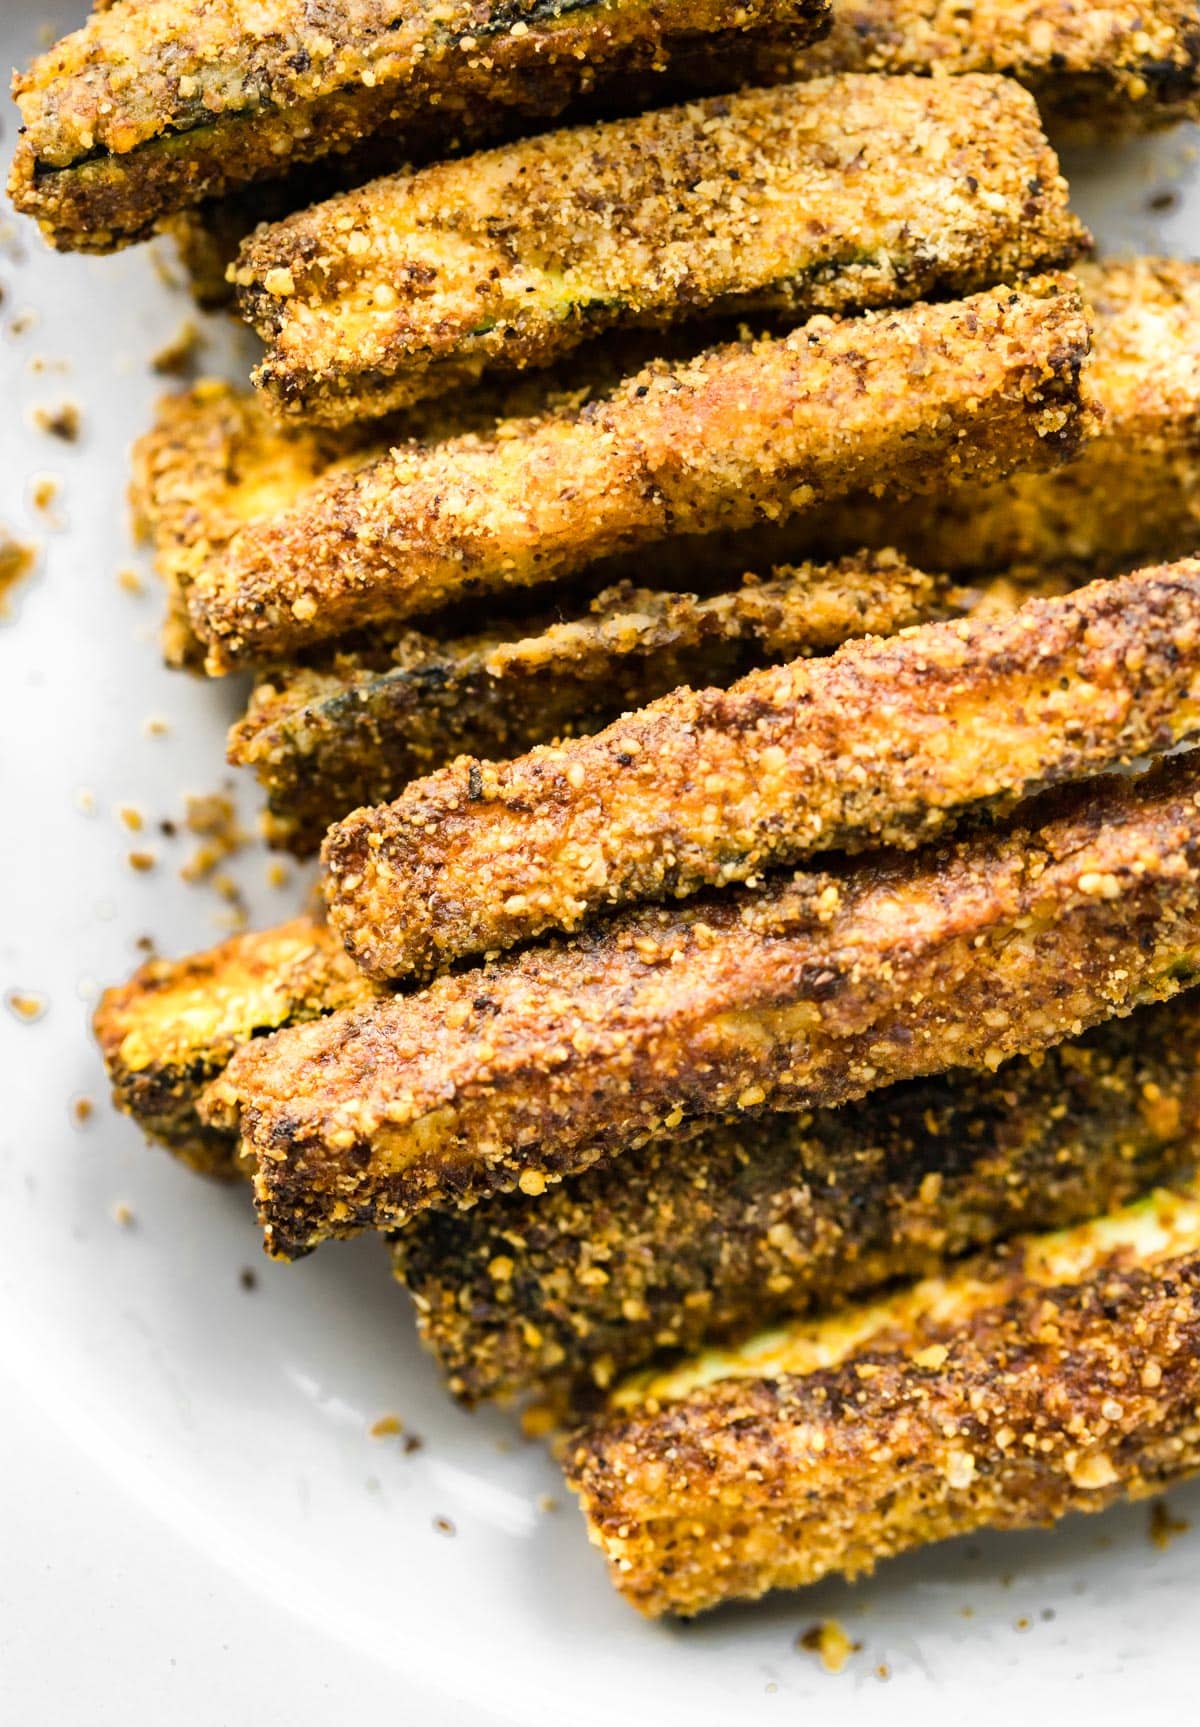 Close up image of cooked breaded air fryer zucchini fries.